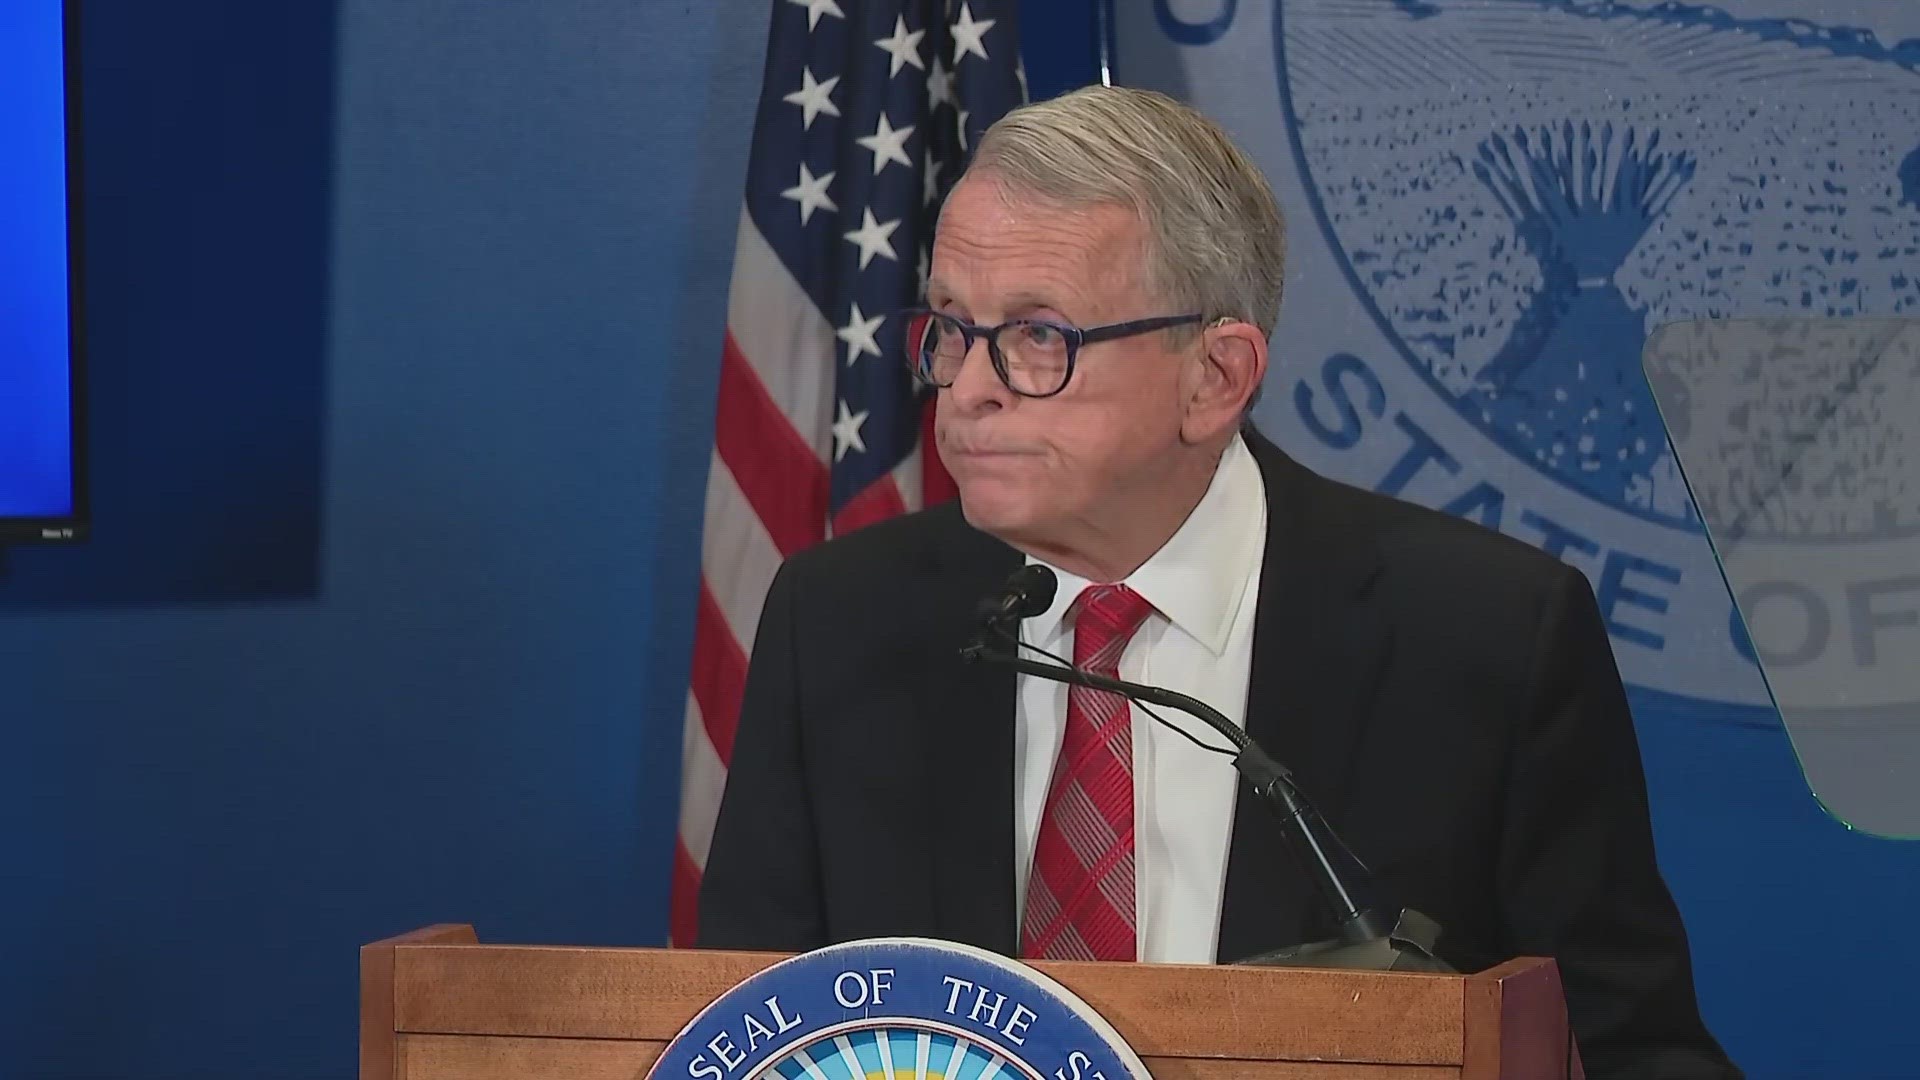 After vetoing House Bill 68, Gov. DeWine announced that he will address a number of goals in the bill by administrative rules.